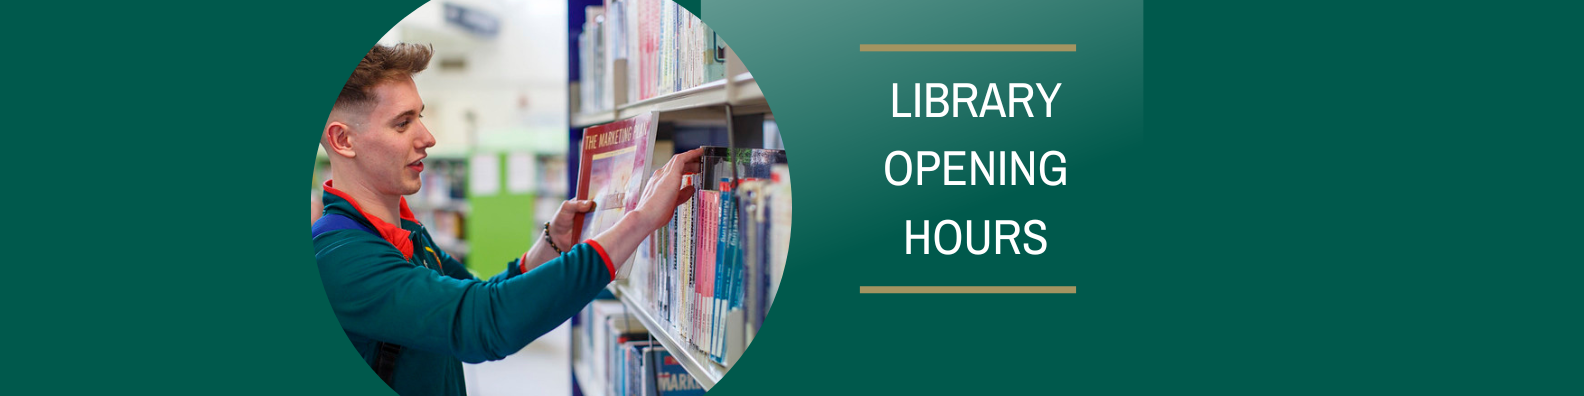 Library opening hours